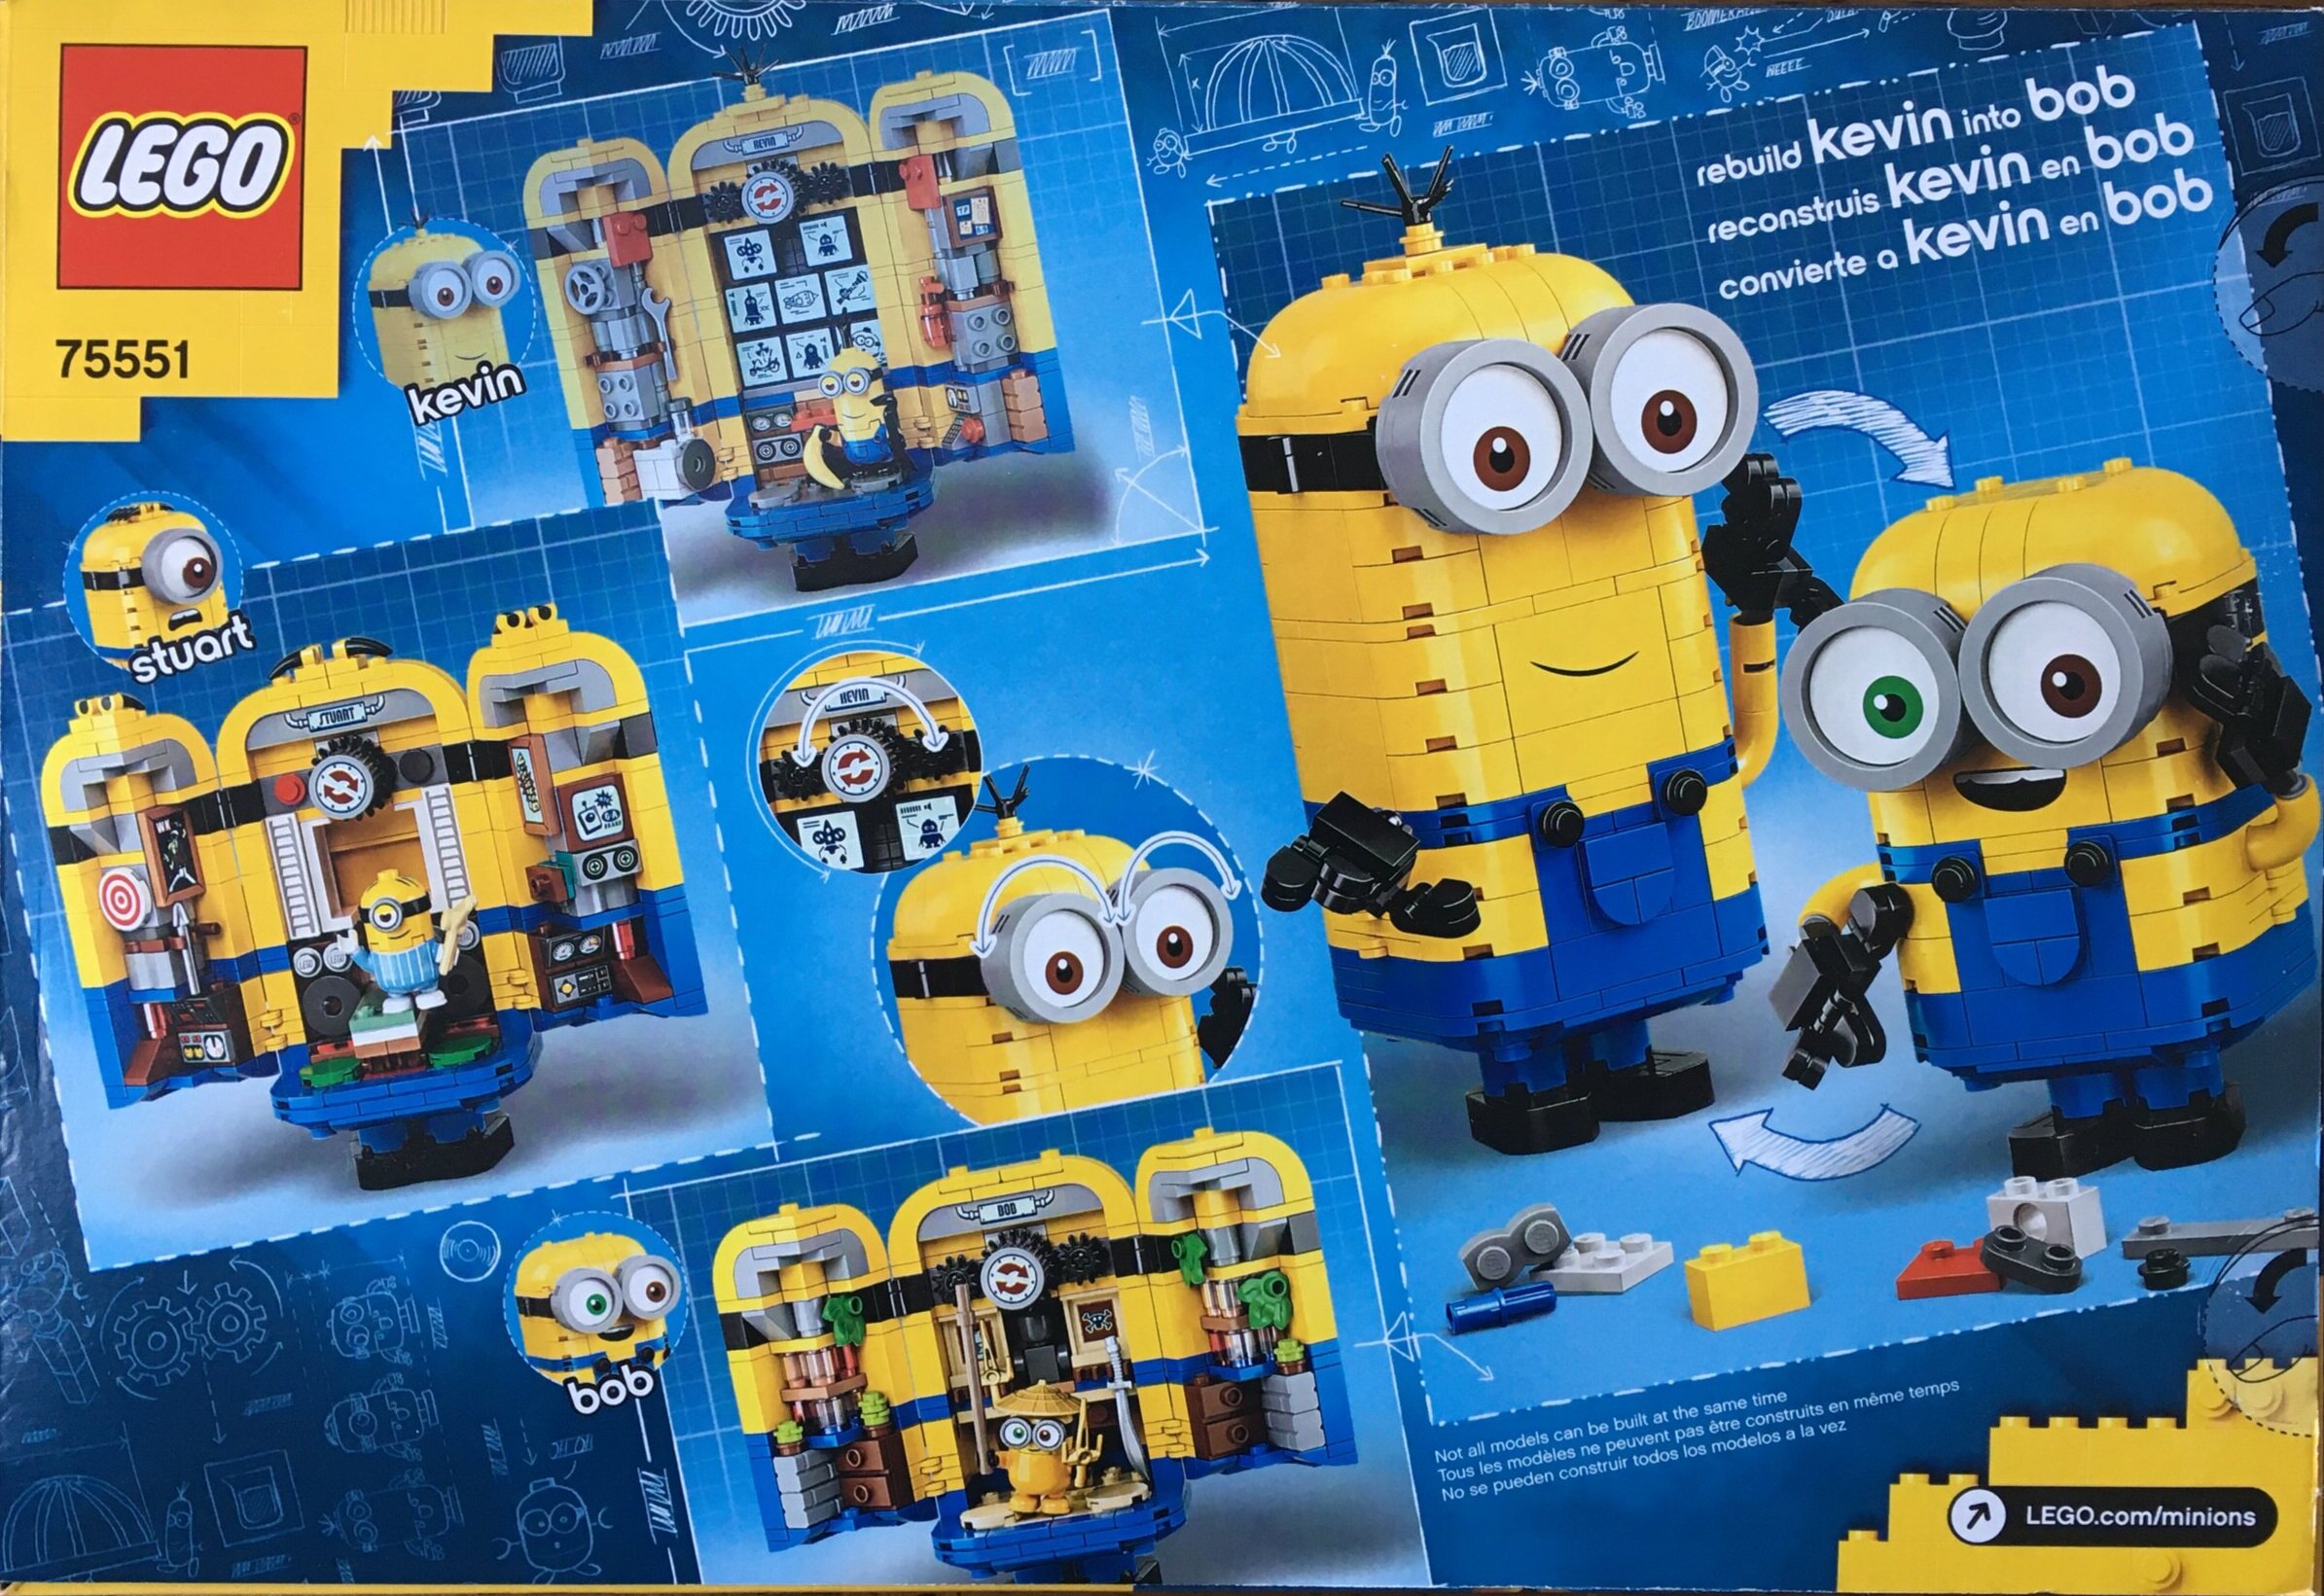 Lego Original Stickers Decal From Set 75551 Brick Built Minions And Their Lair Toys Hobbies Building Toys Sets Packs - trunks roblox decal